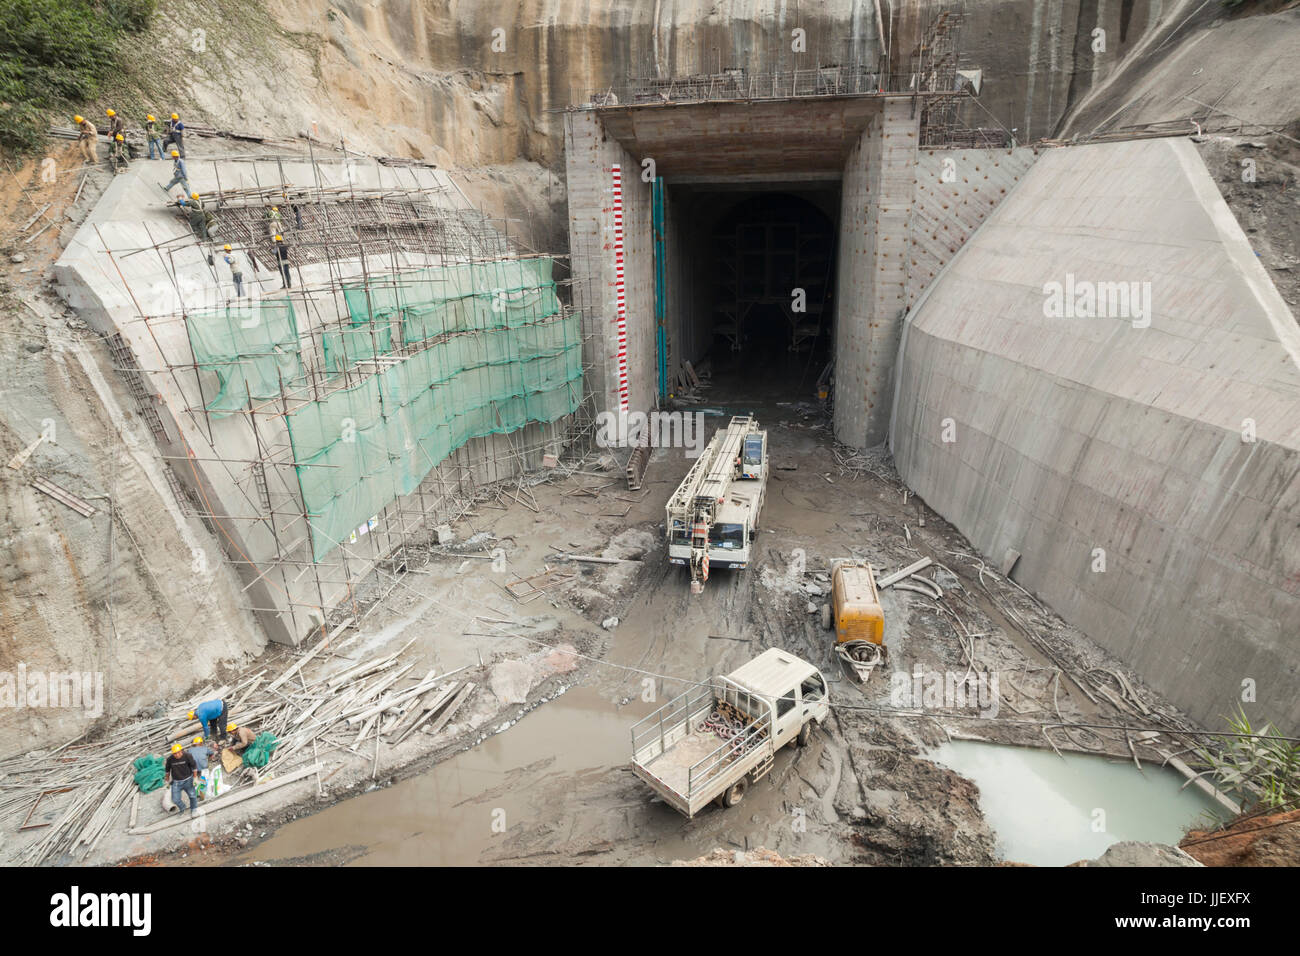 The entrance to the 600 m long diversion (box) dam at the site of Dam #6 on the Nam Ou River, Laos. The river would be diverted into this tunnel six days later (27 January 2014) to allow construction of the dam across the original river channel. Stock Photo